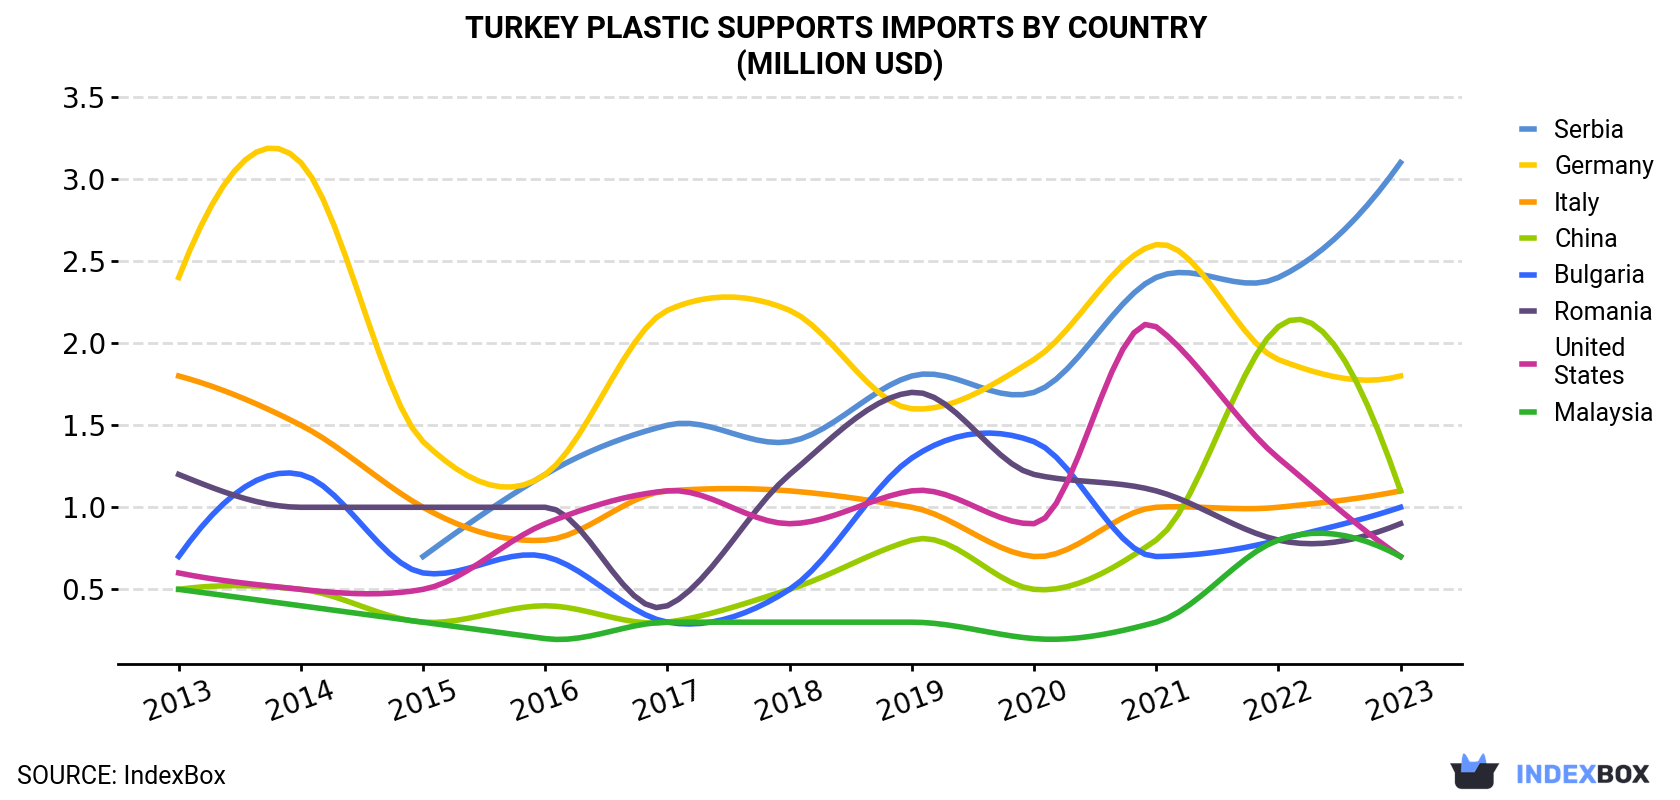 Turkey Plastic Supports Imports By Country (Million USD)